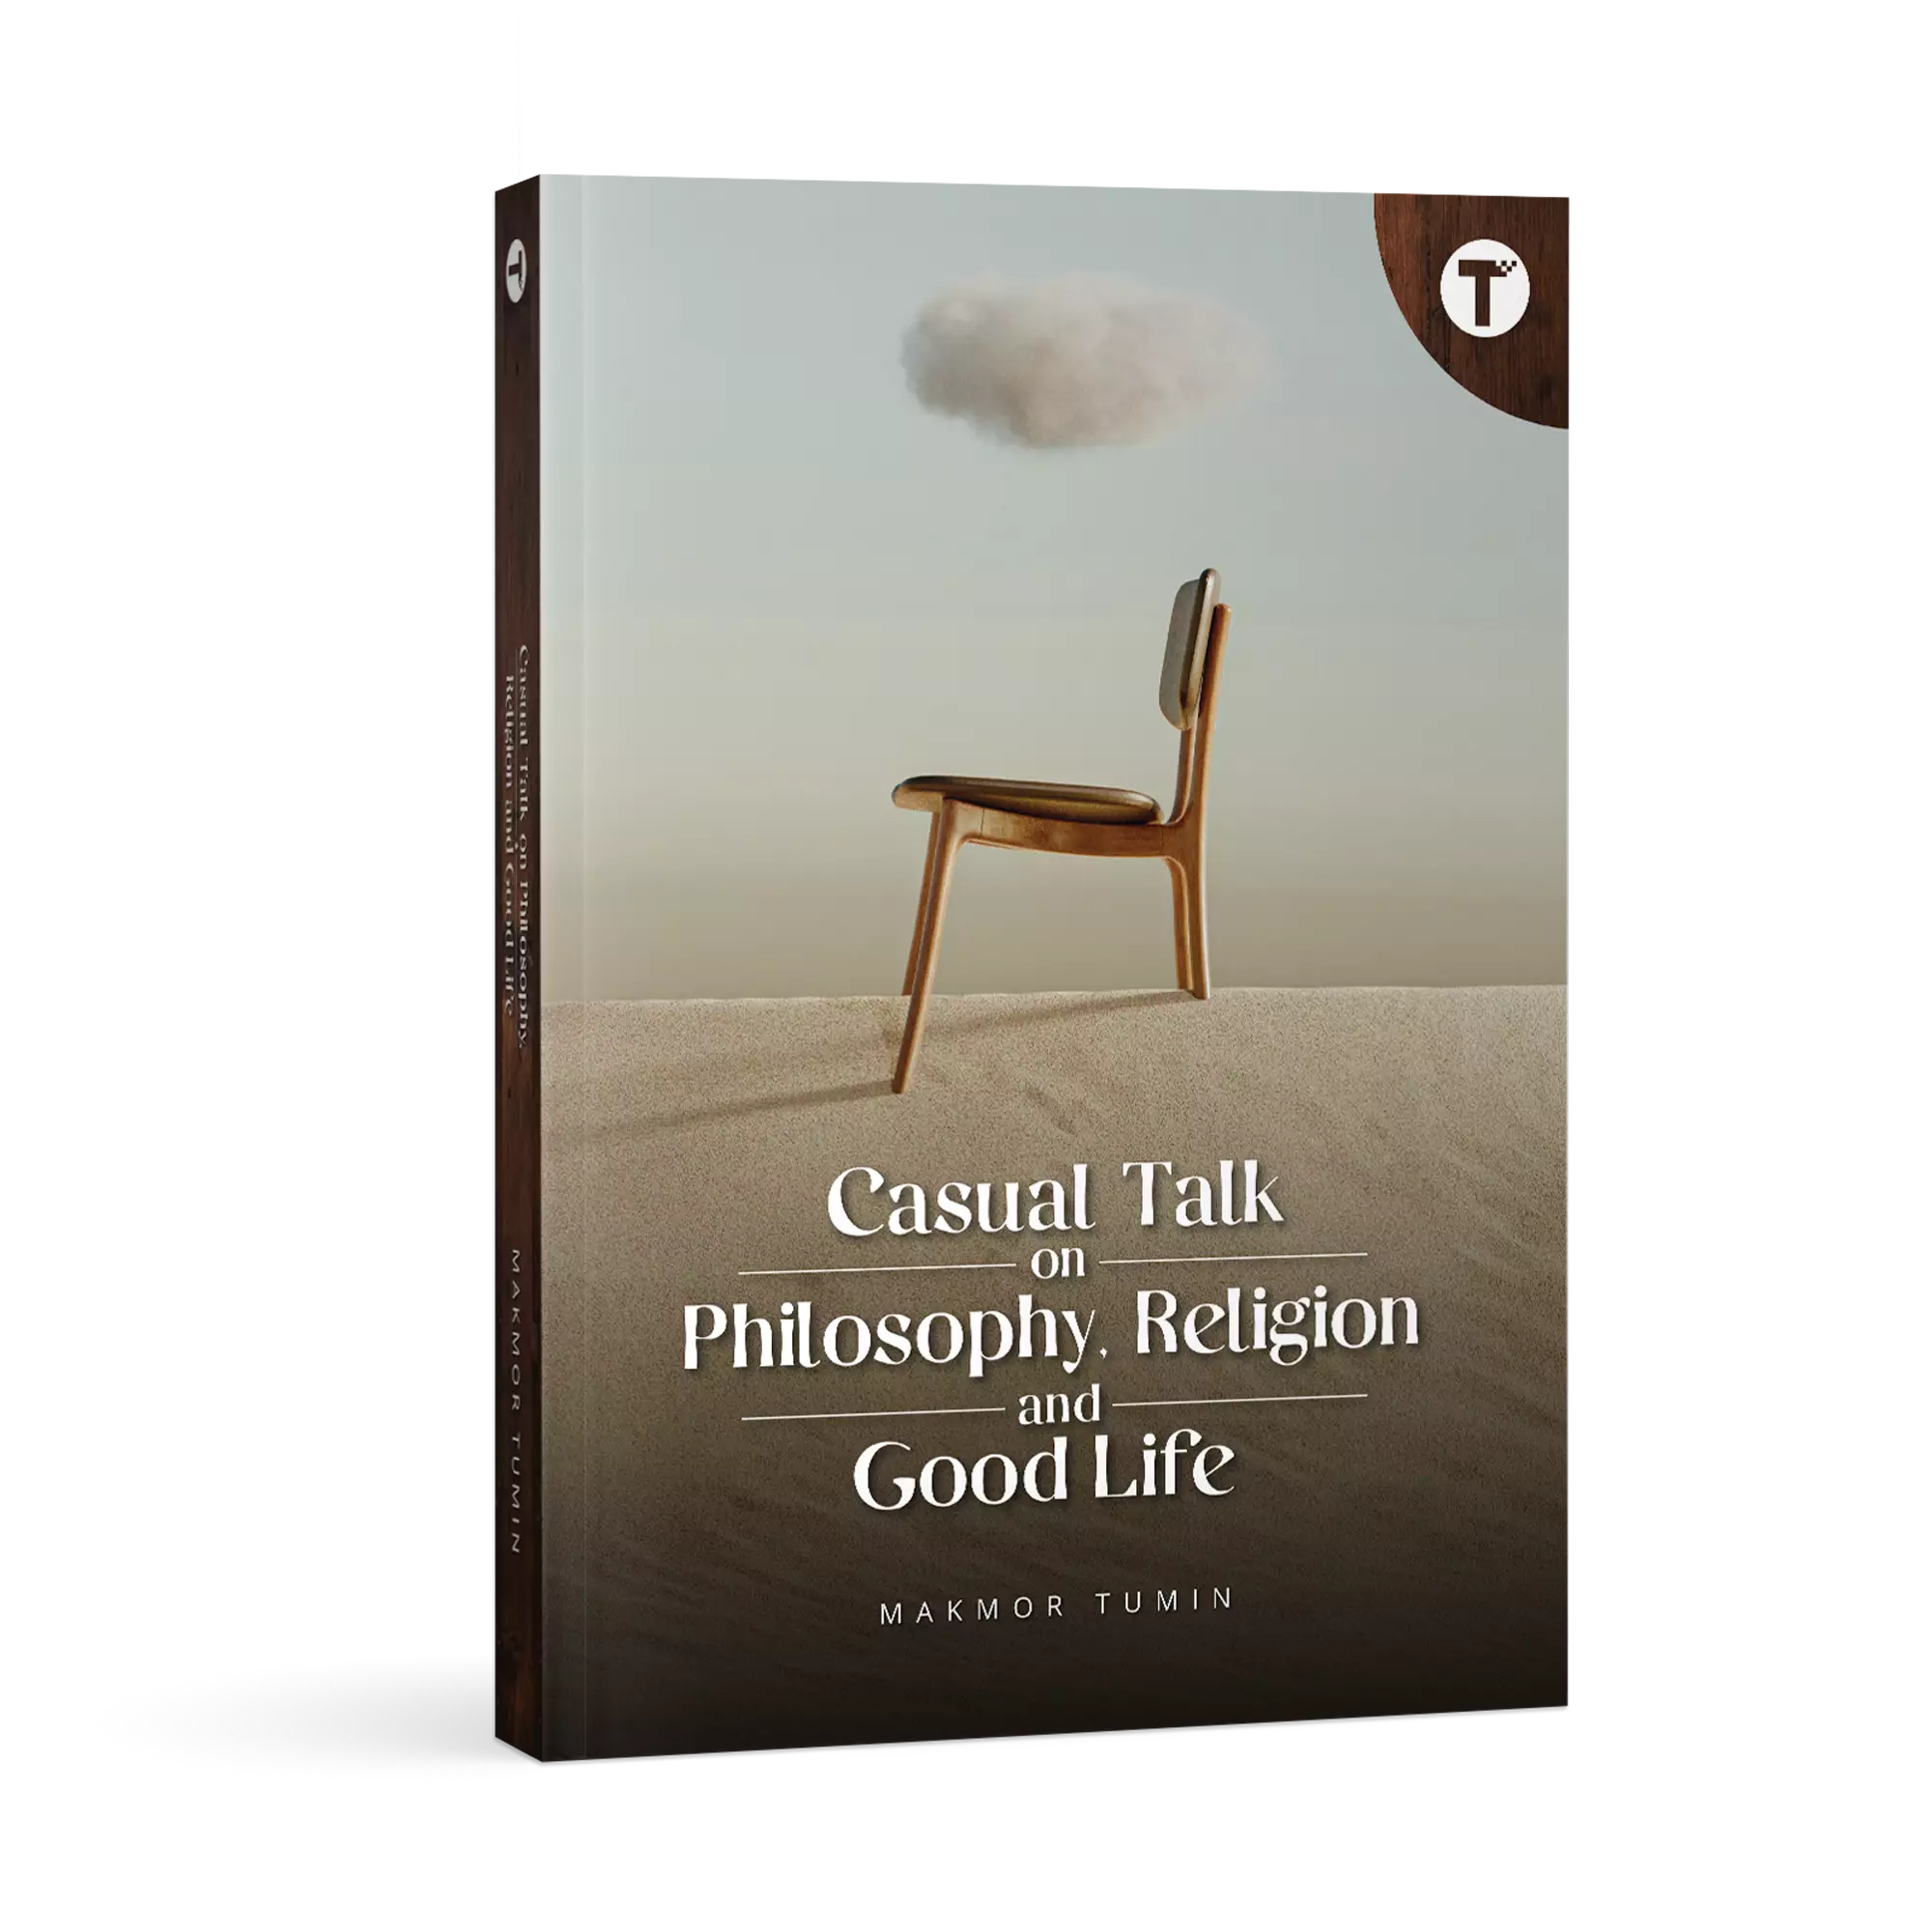 Casual Talk on Philosophy, Religion and Good Life by Dr. Makmor Tumin